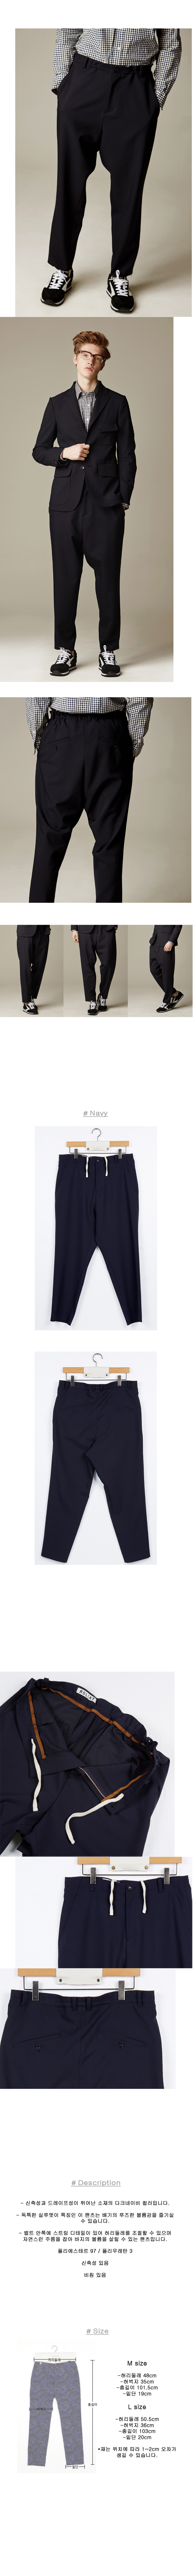 Loose-Fit String Pants_Navy(30%off 210000→147000)